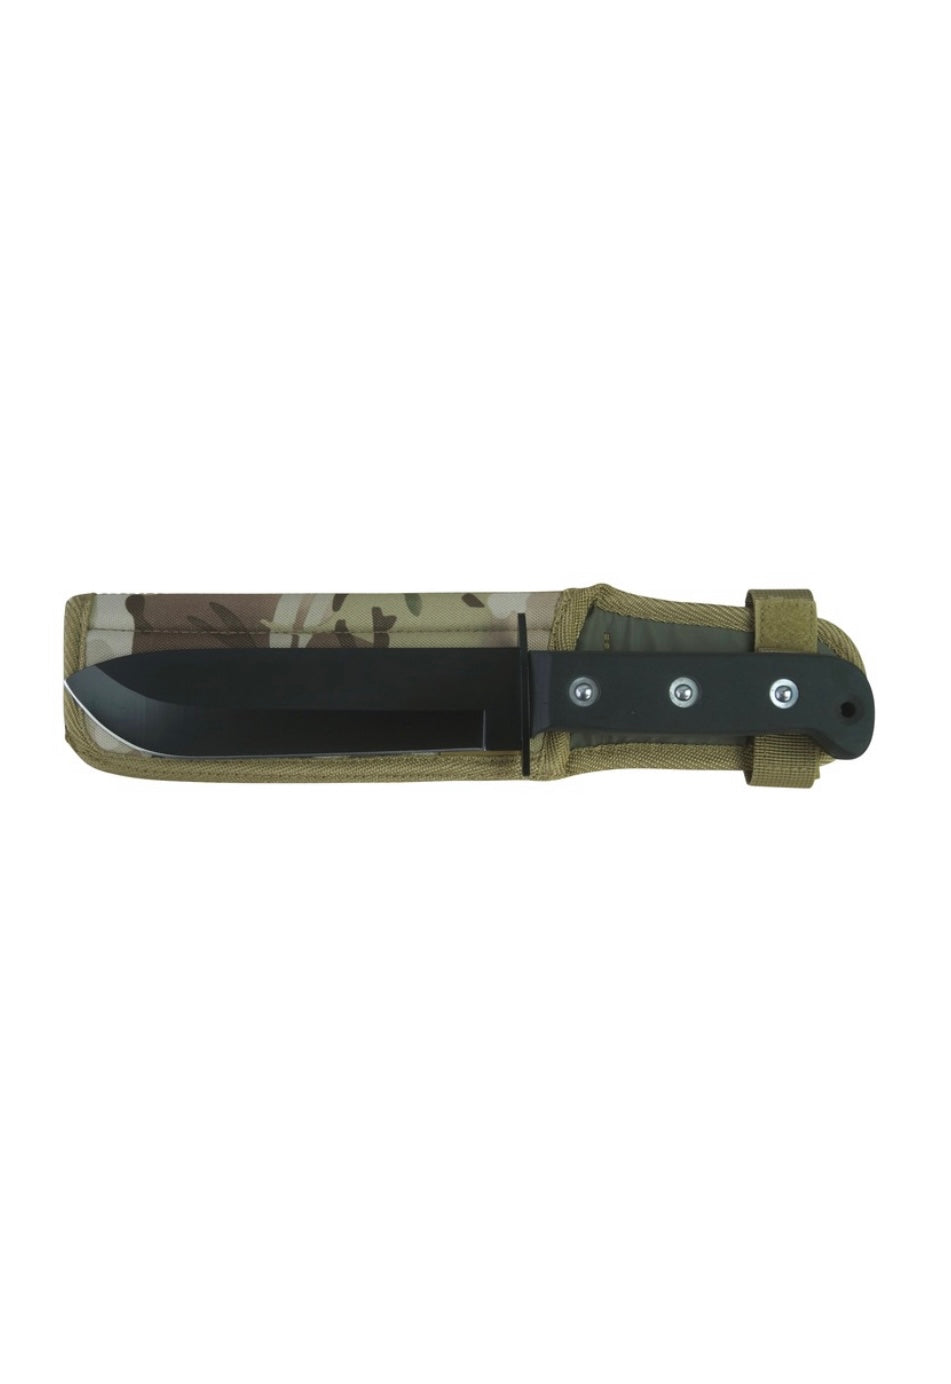 British Army Warrior Knife- BTP"ID MUST BE SENT PRIOR TO DESPATCH OVER 18s ONLY"